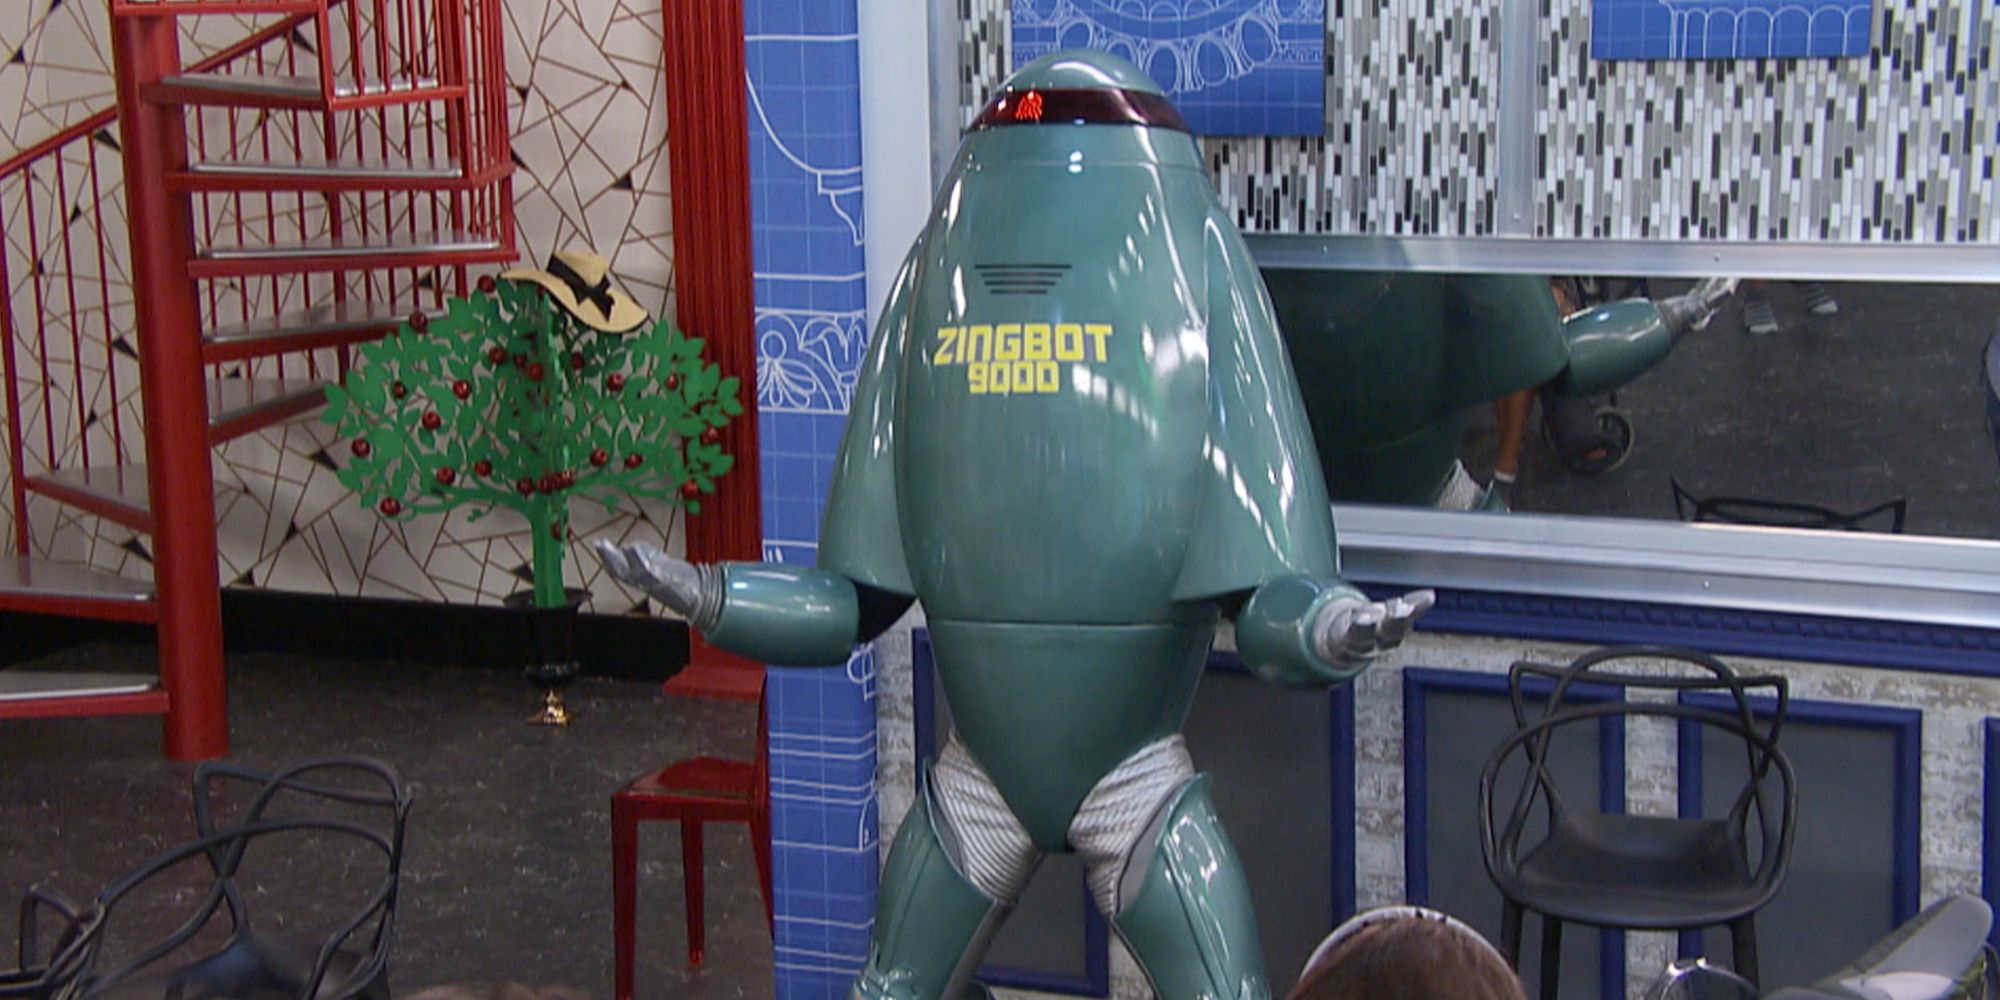 Zingbot from Big Brother standing in the backyard.